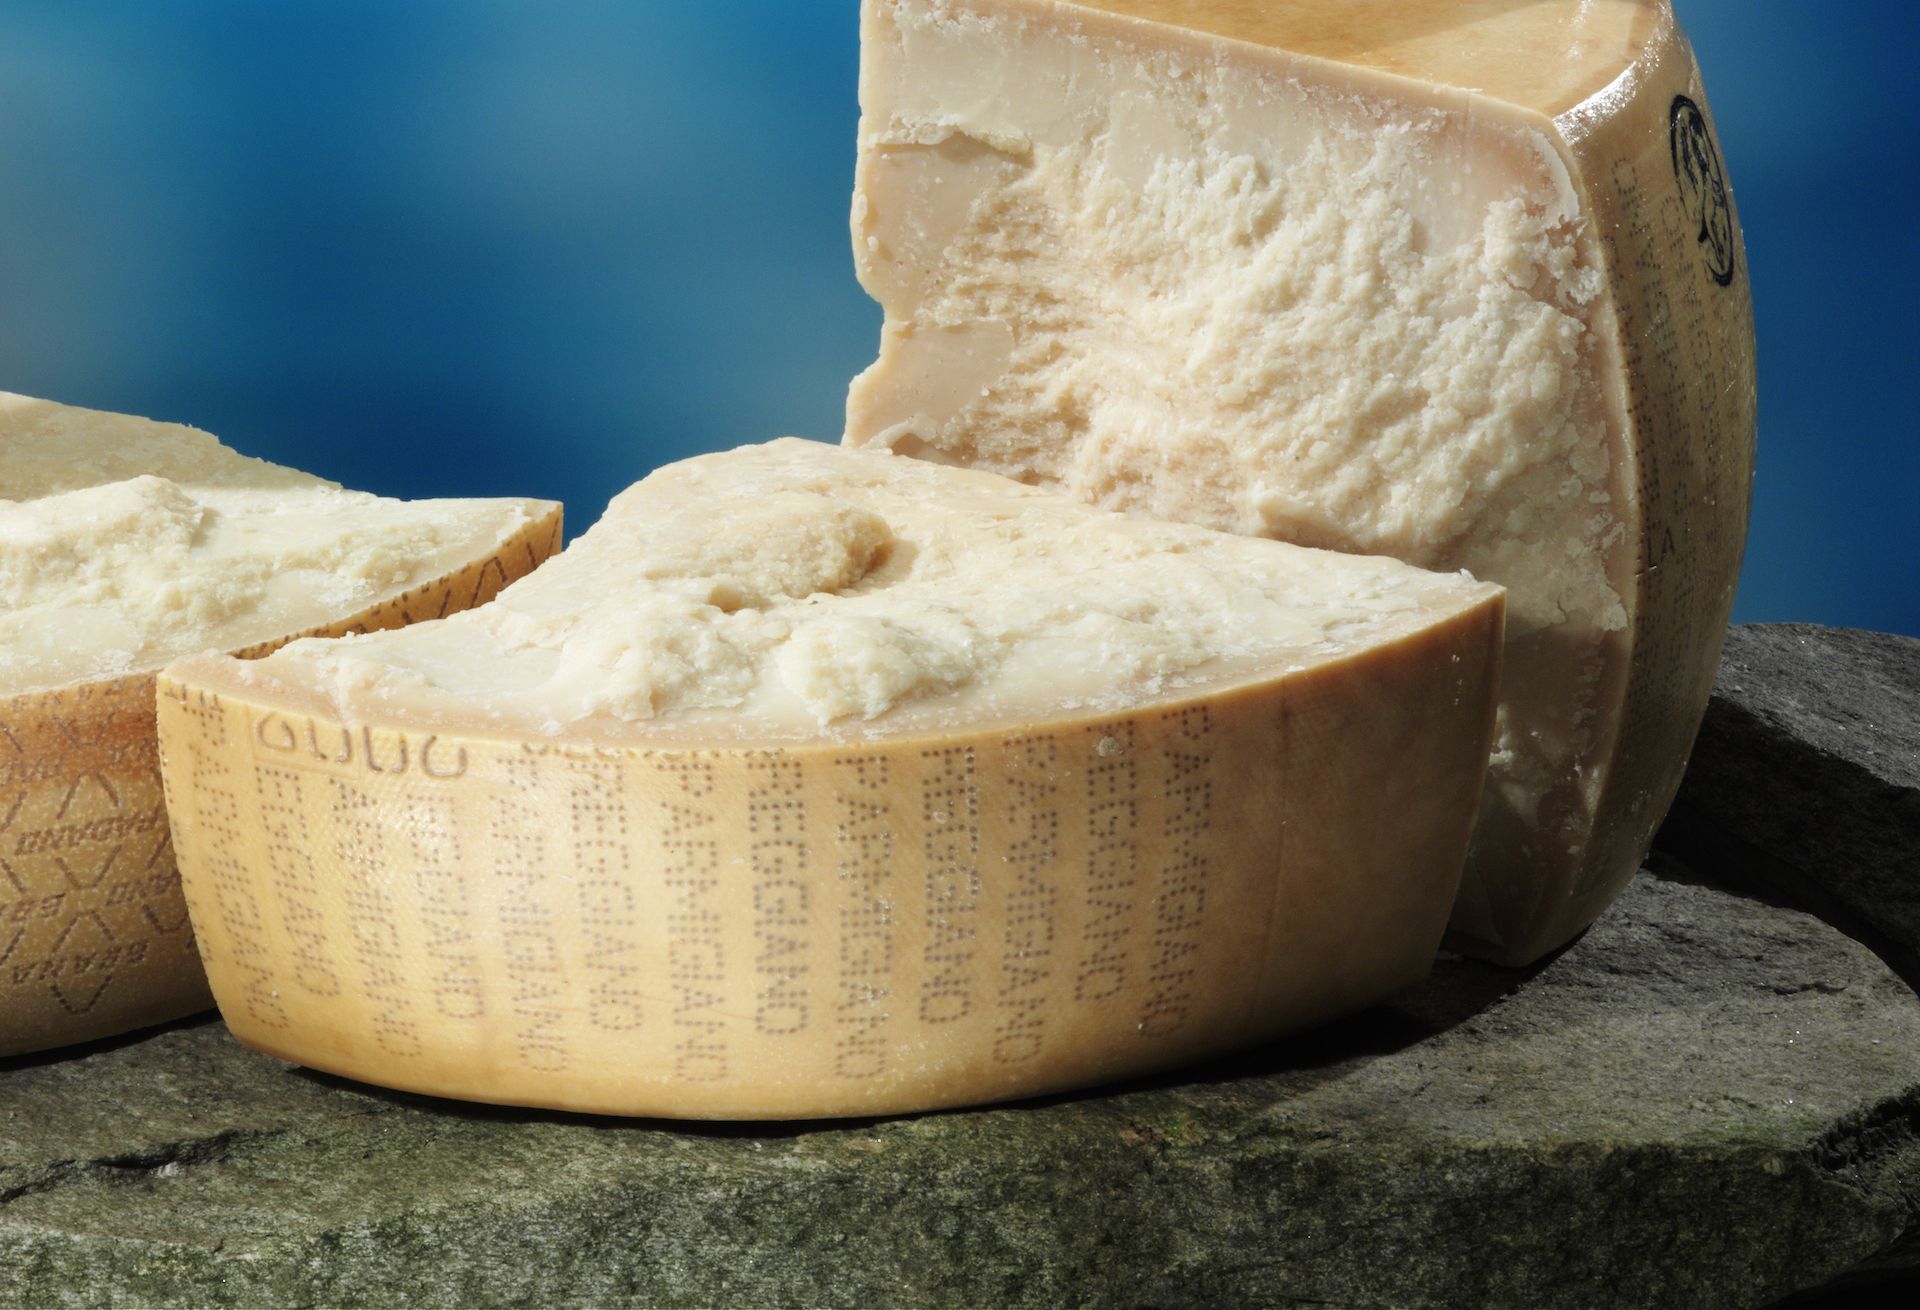 Parmesan Cheese Has a Lot of Health Benefits